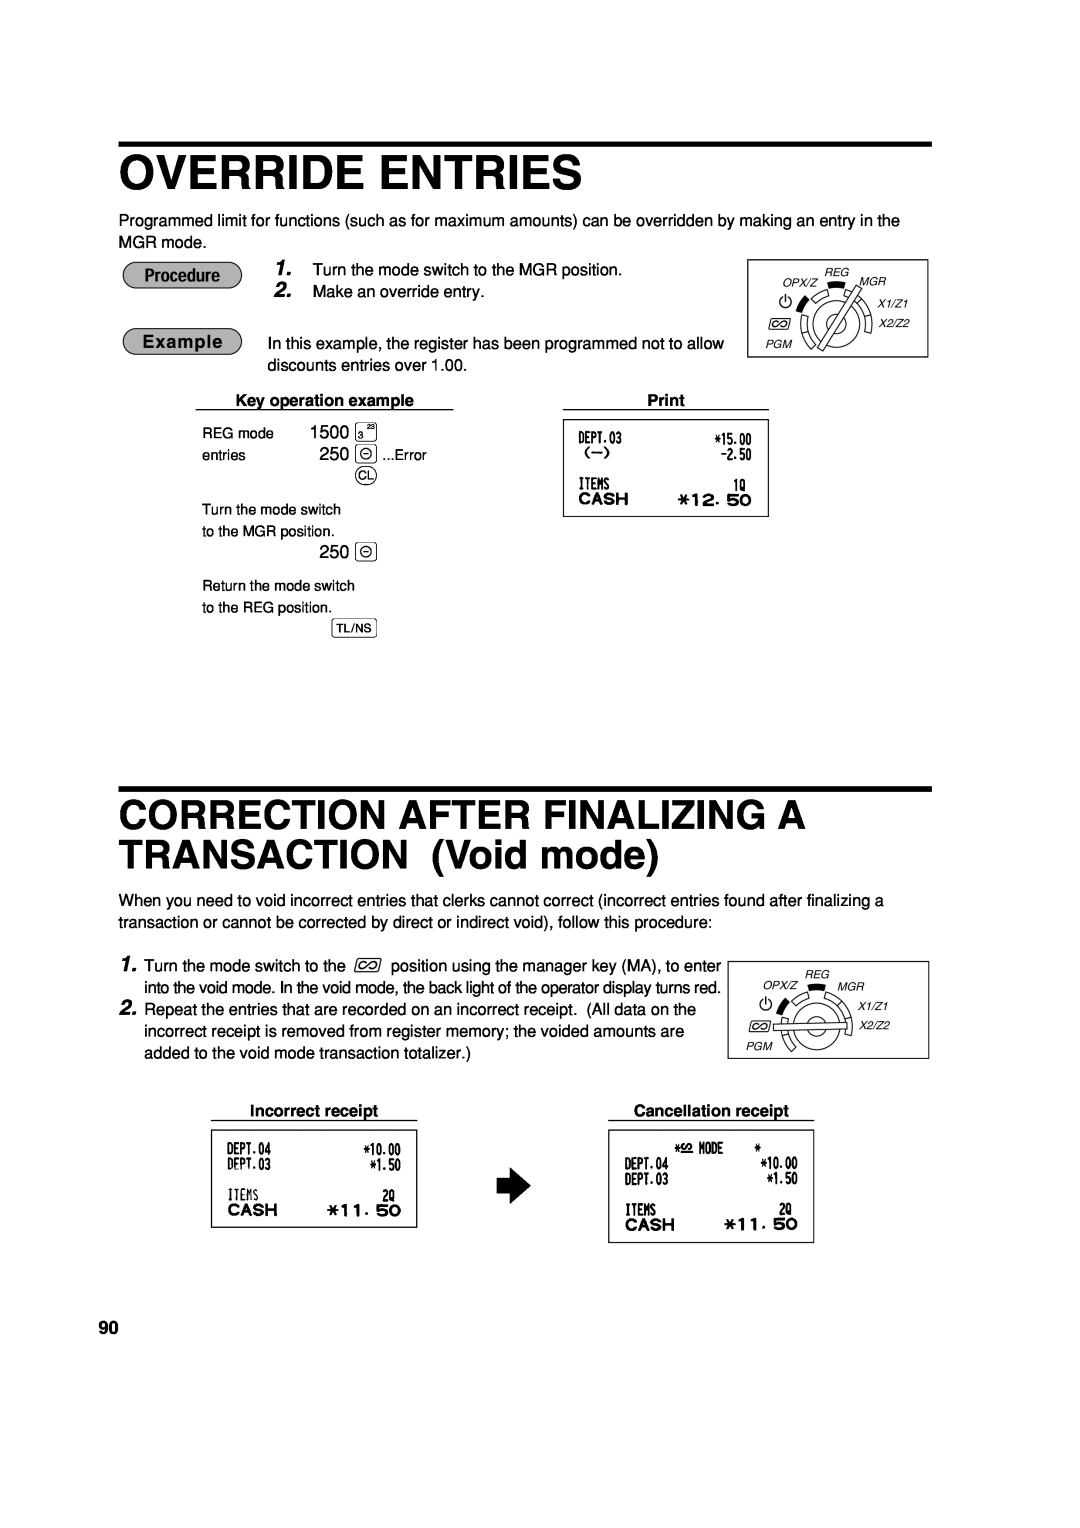 Sharp XE-A303 Override Entries, CORRECTION AFTER FINALIZING A TRANSACTION Void mode, 1500, Key operation example, Print 